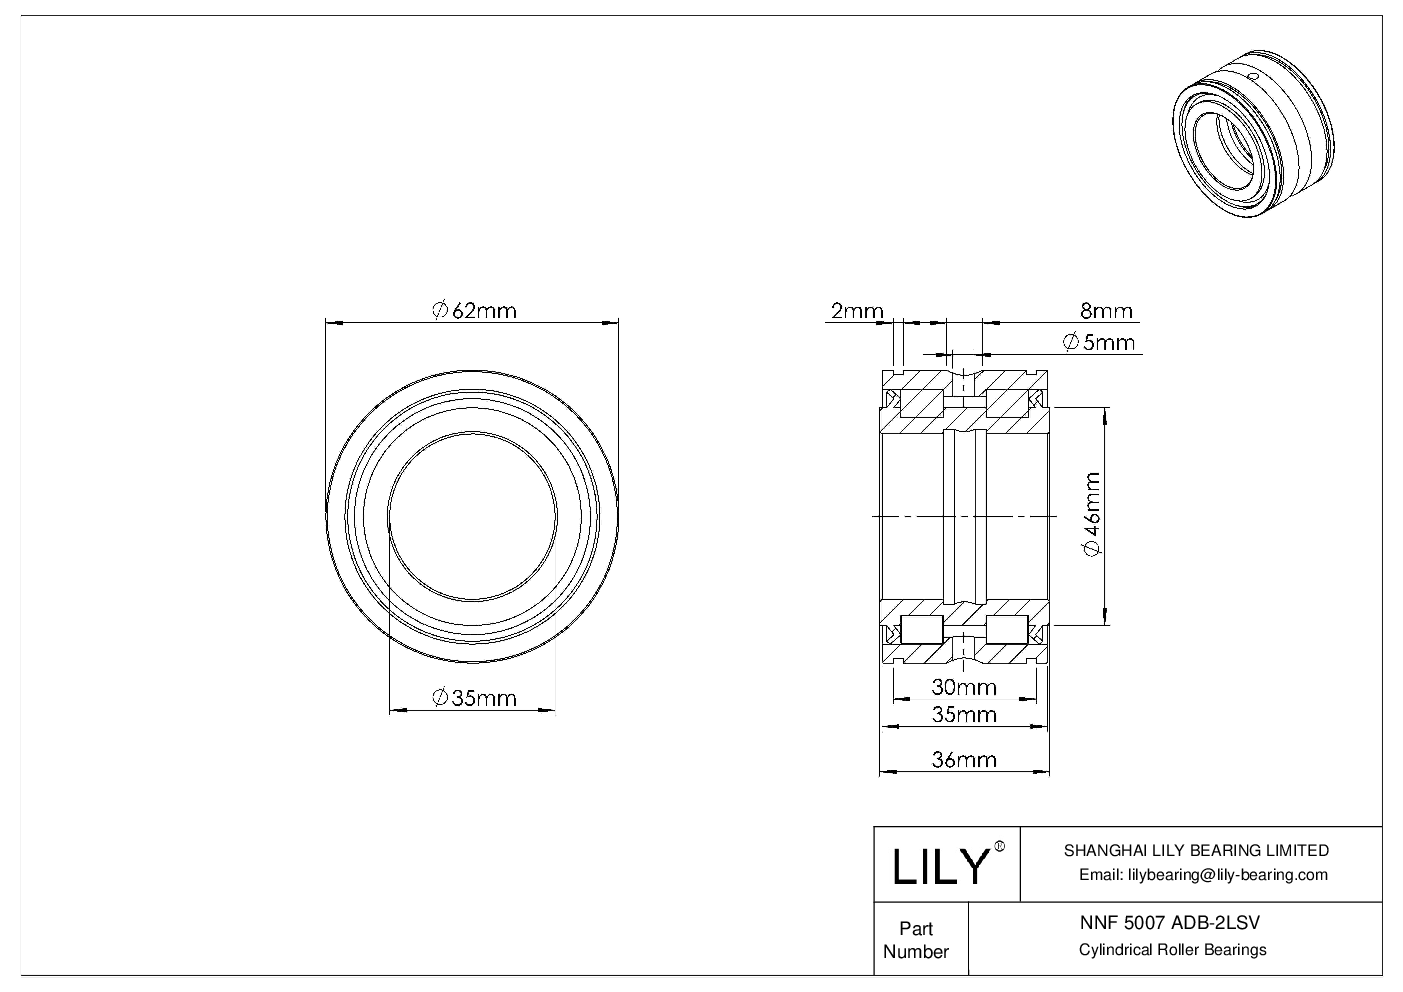 NNF 5007 ADB-2LSV Double Row Full Complement Cylindrical Roller Bearings cad drawing